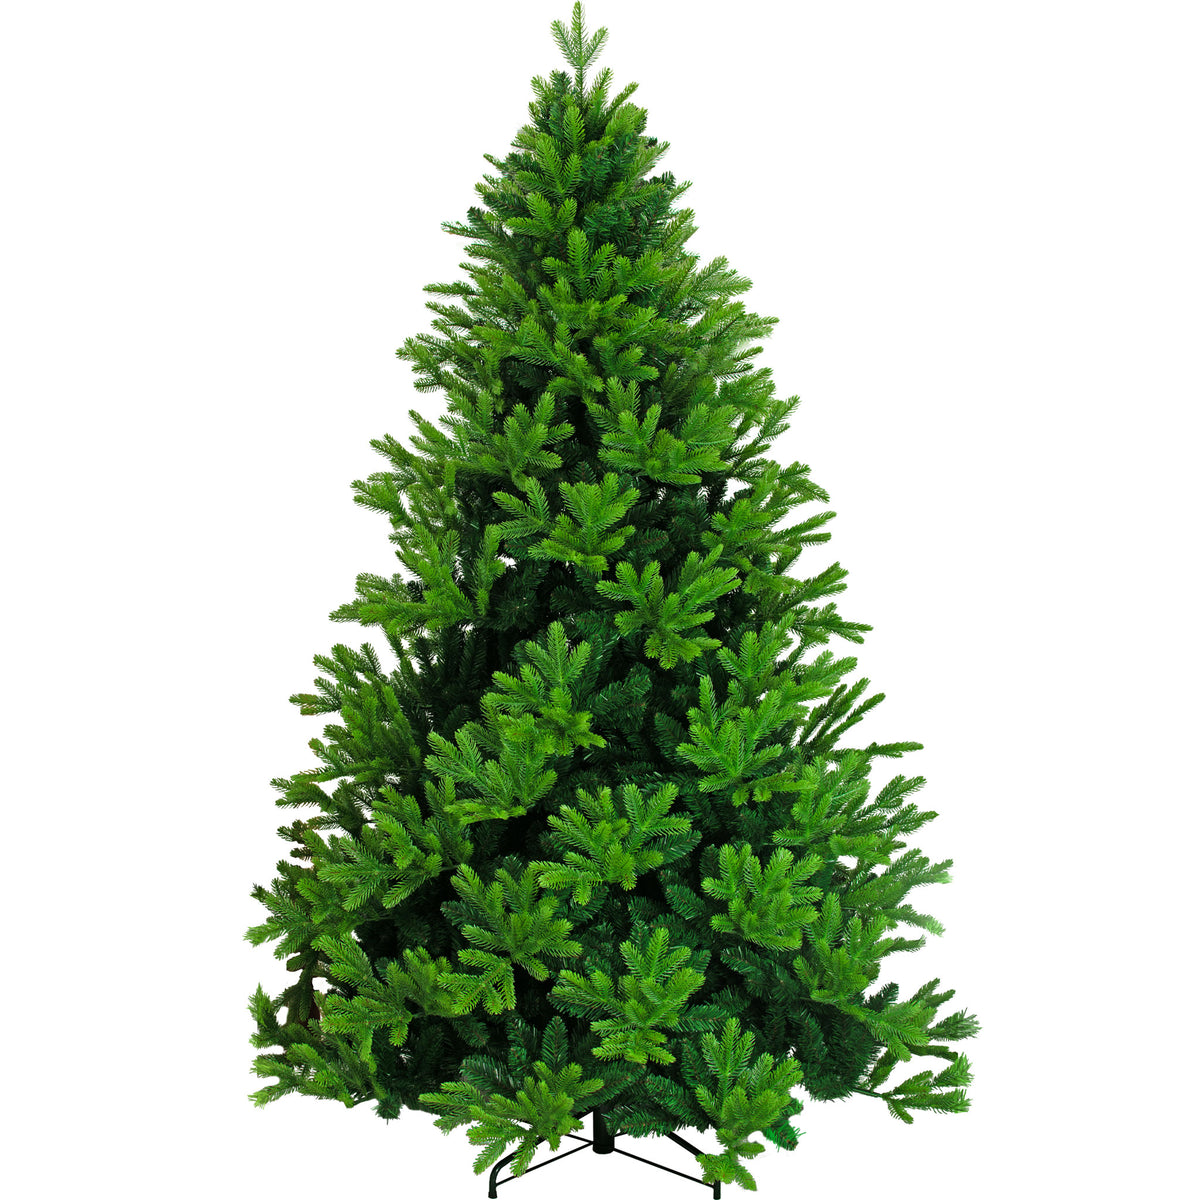 Introducing the 7.5FT Tall Norway Spruce Tree from our Luxe Christmas Collection!